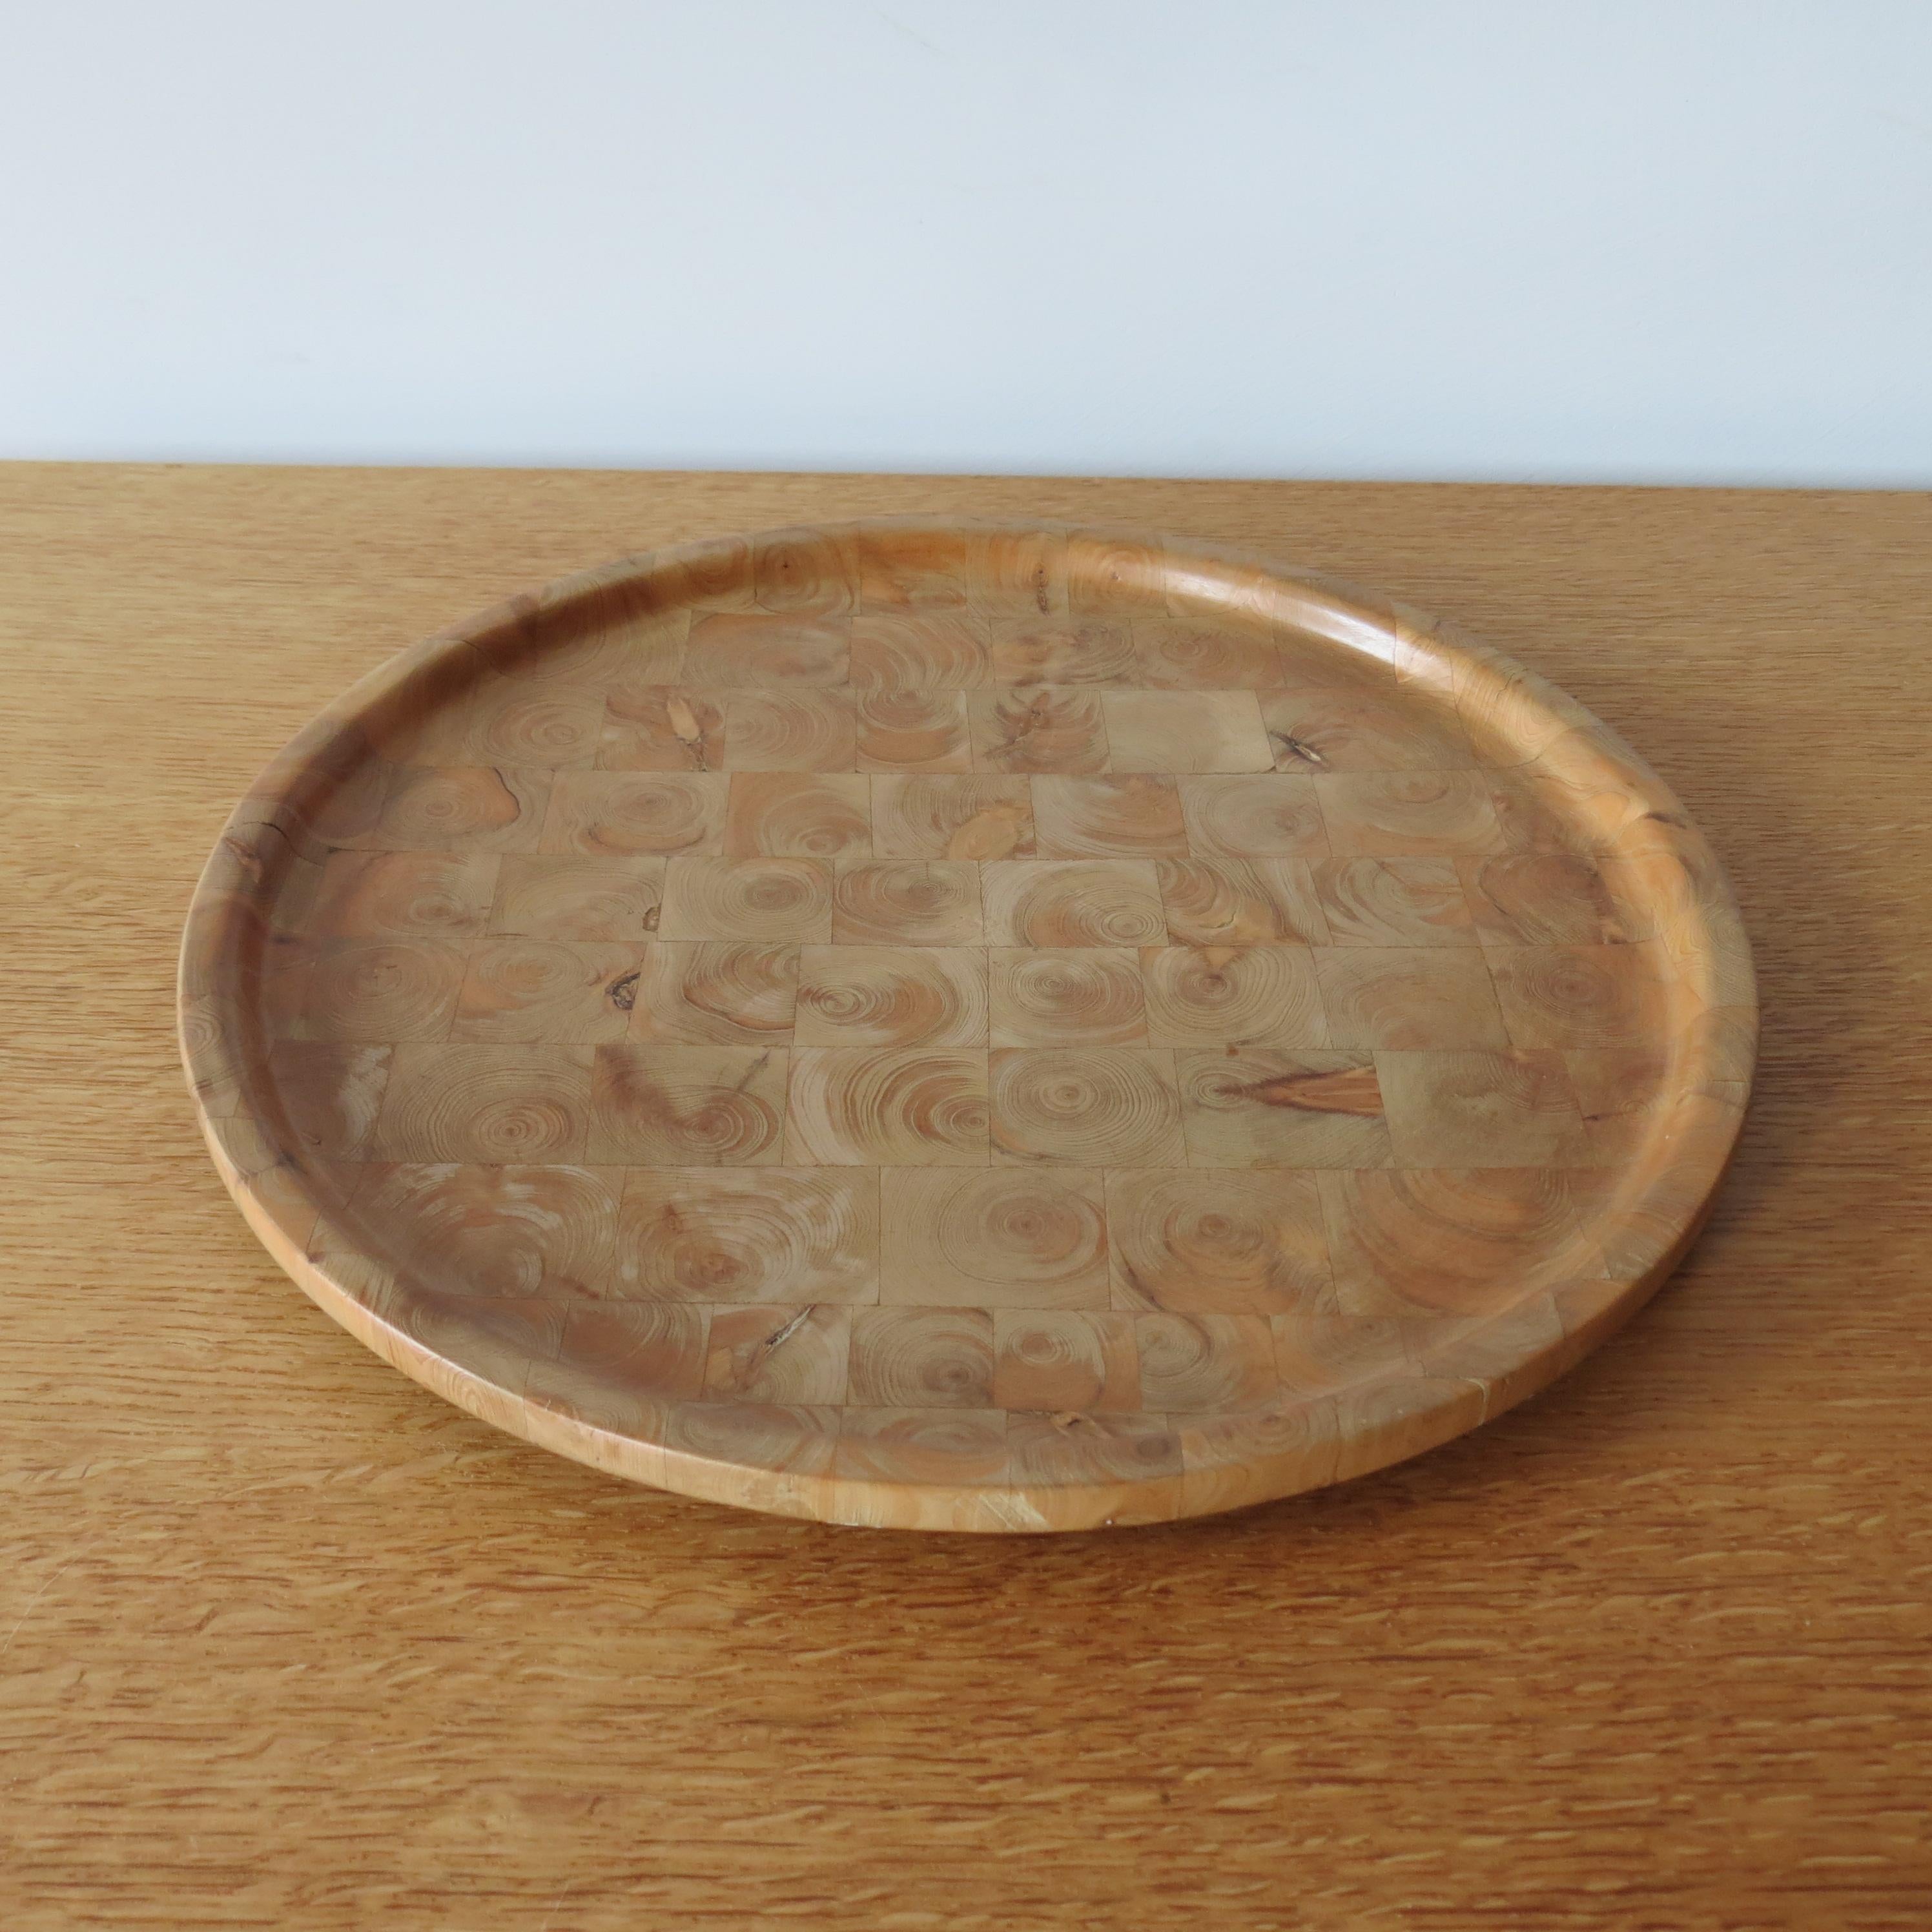 Vintage wooden tray plate made from block wood and then hand-turned. Hand produced in Finland the early 1980s from solid Juniper wood

Yvaskuua Finland 1980 hand written to the underside
Wonderful grain and color
Measures: 26cm diameter x 2cm tall